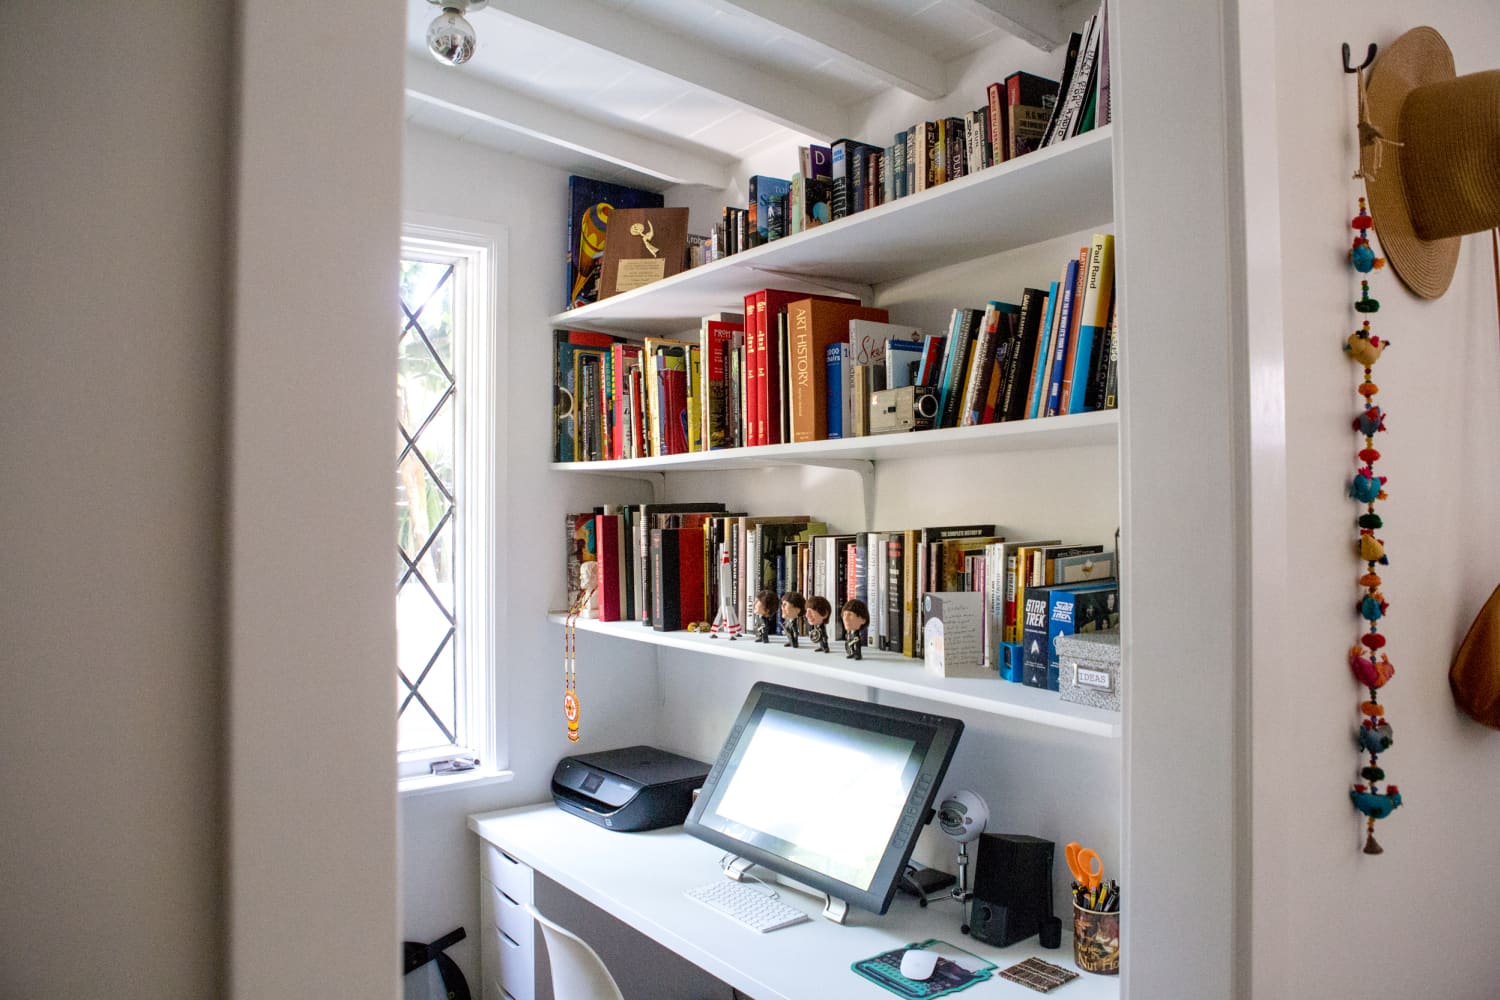 Small Home Office Ideas - How to Make a Home Office in a Tiny